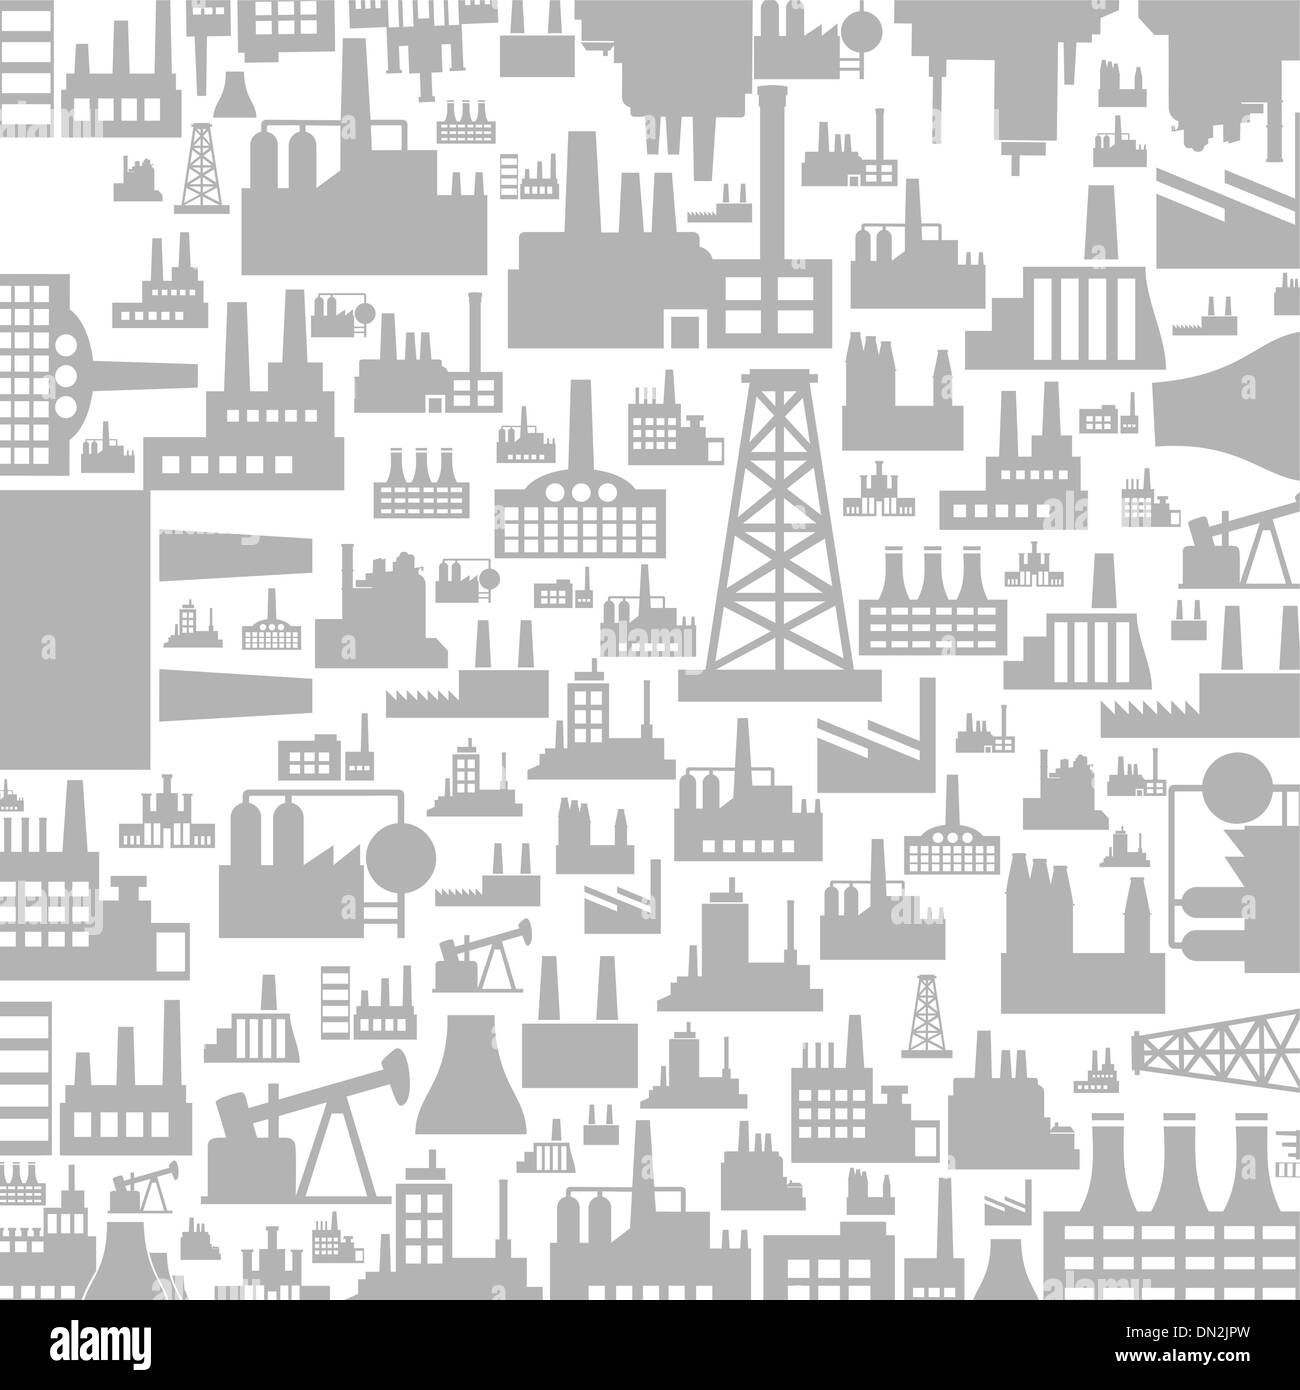 Background the industry3 Stock Vector